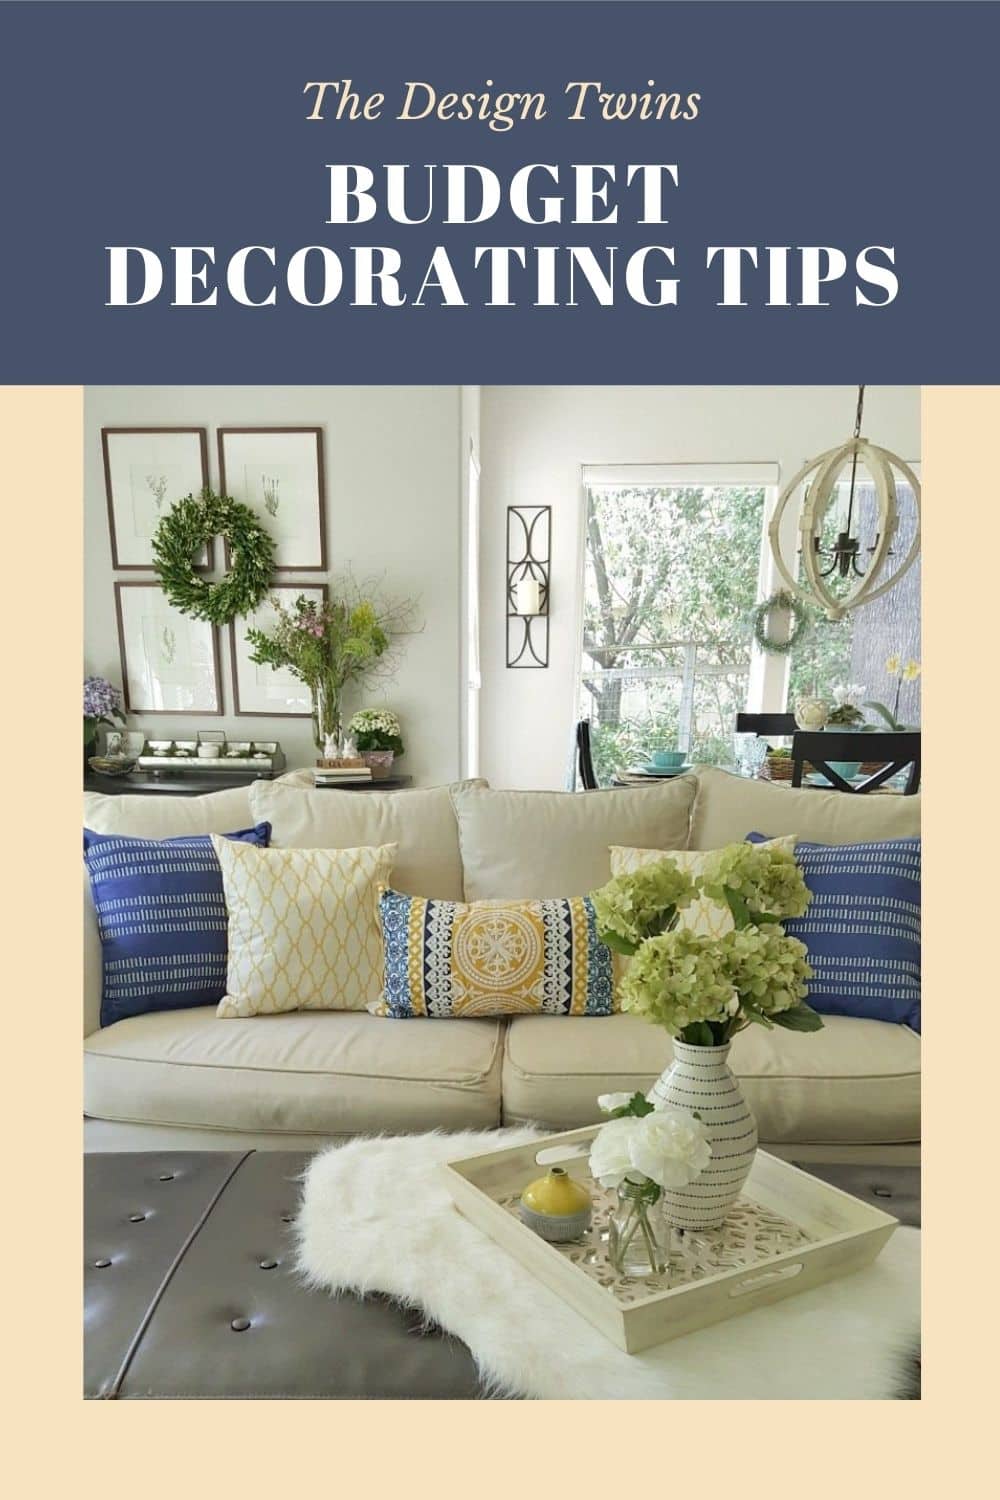 Small Changes with Big Impact: Budget Decorating - The Design Twins